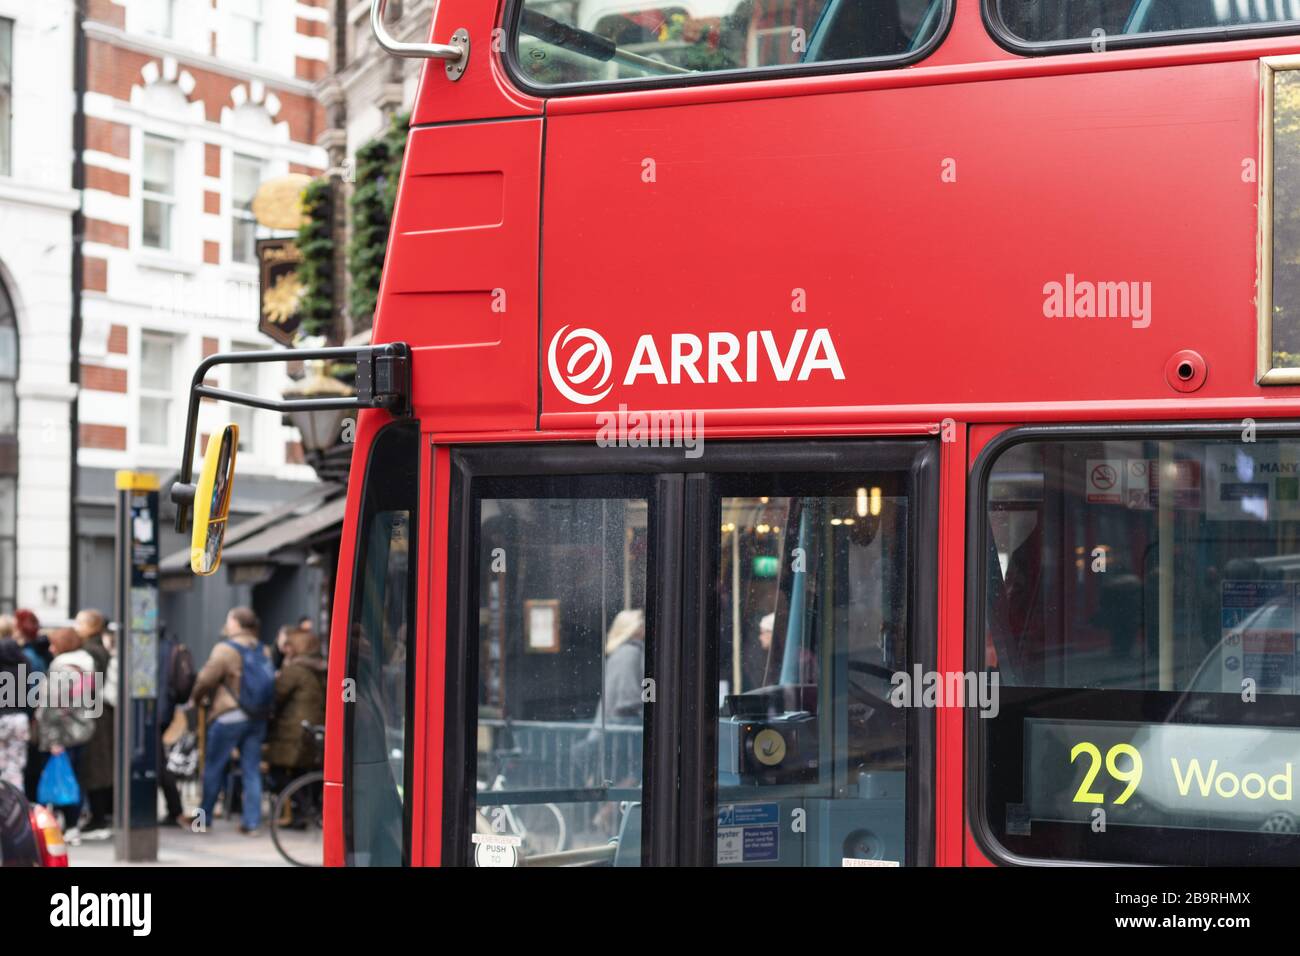 London / UK - February 22nd 2020 - Arriva logo on the side of a red London bus Stock Photo